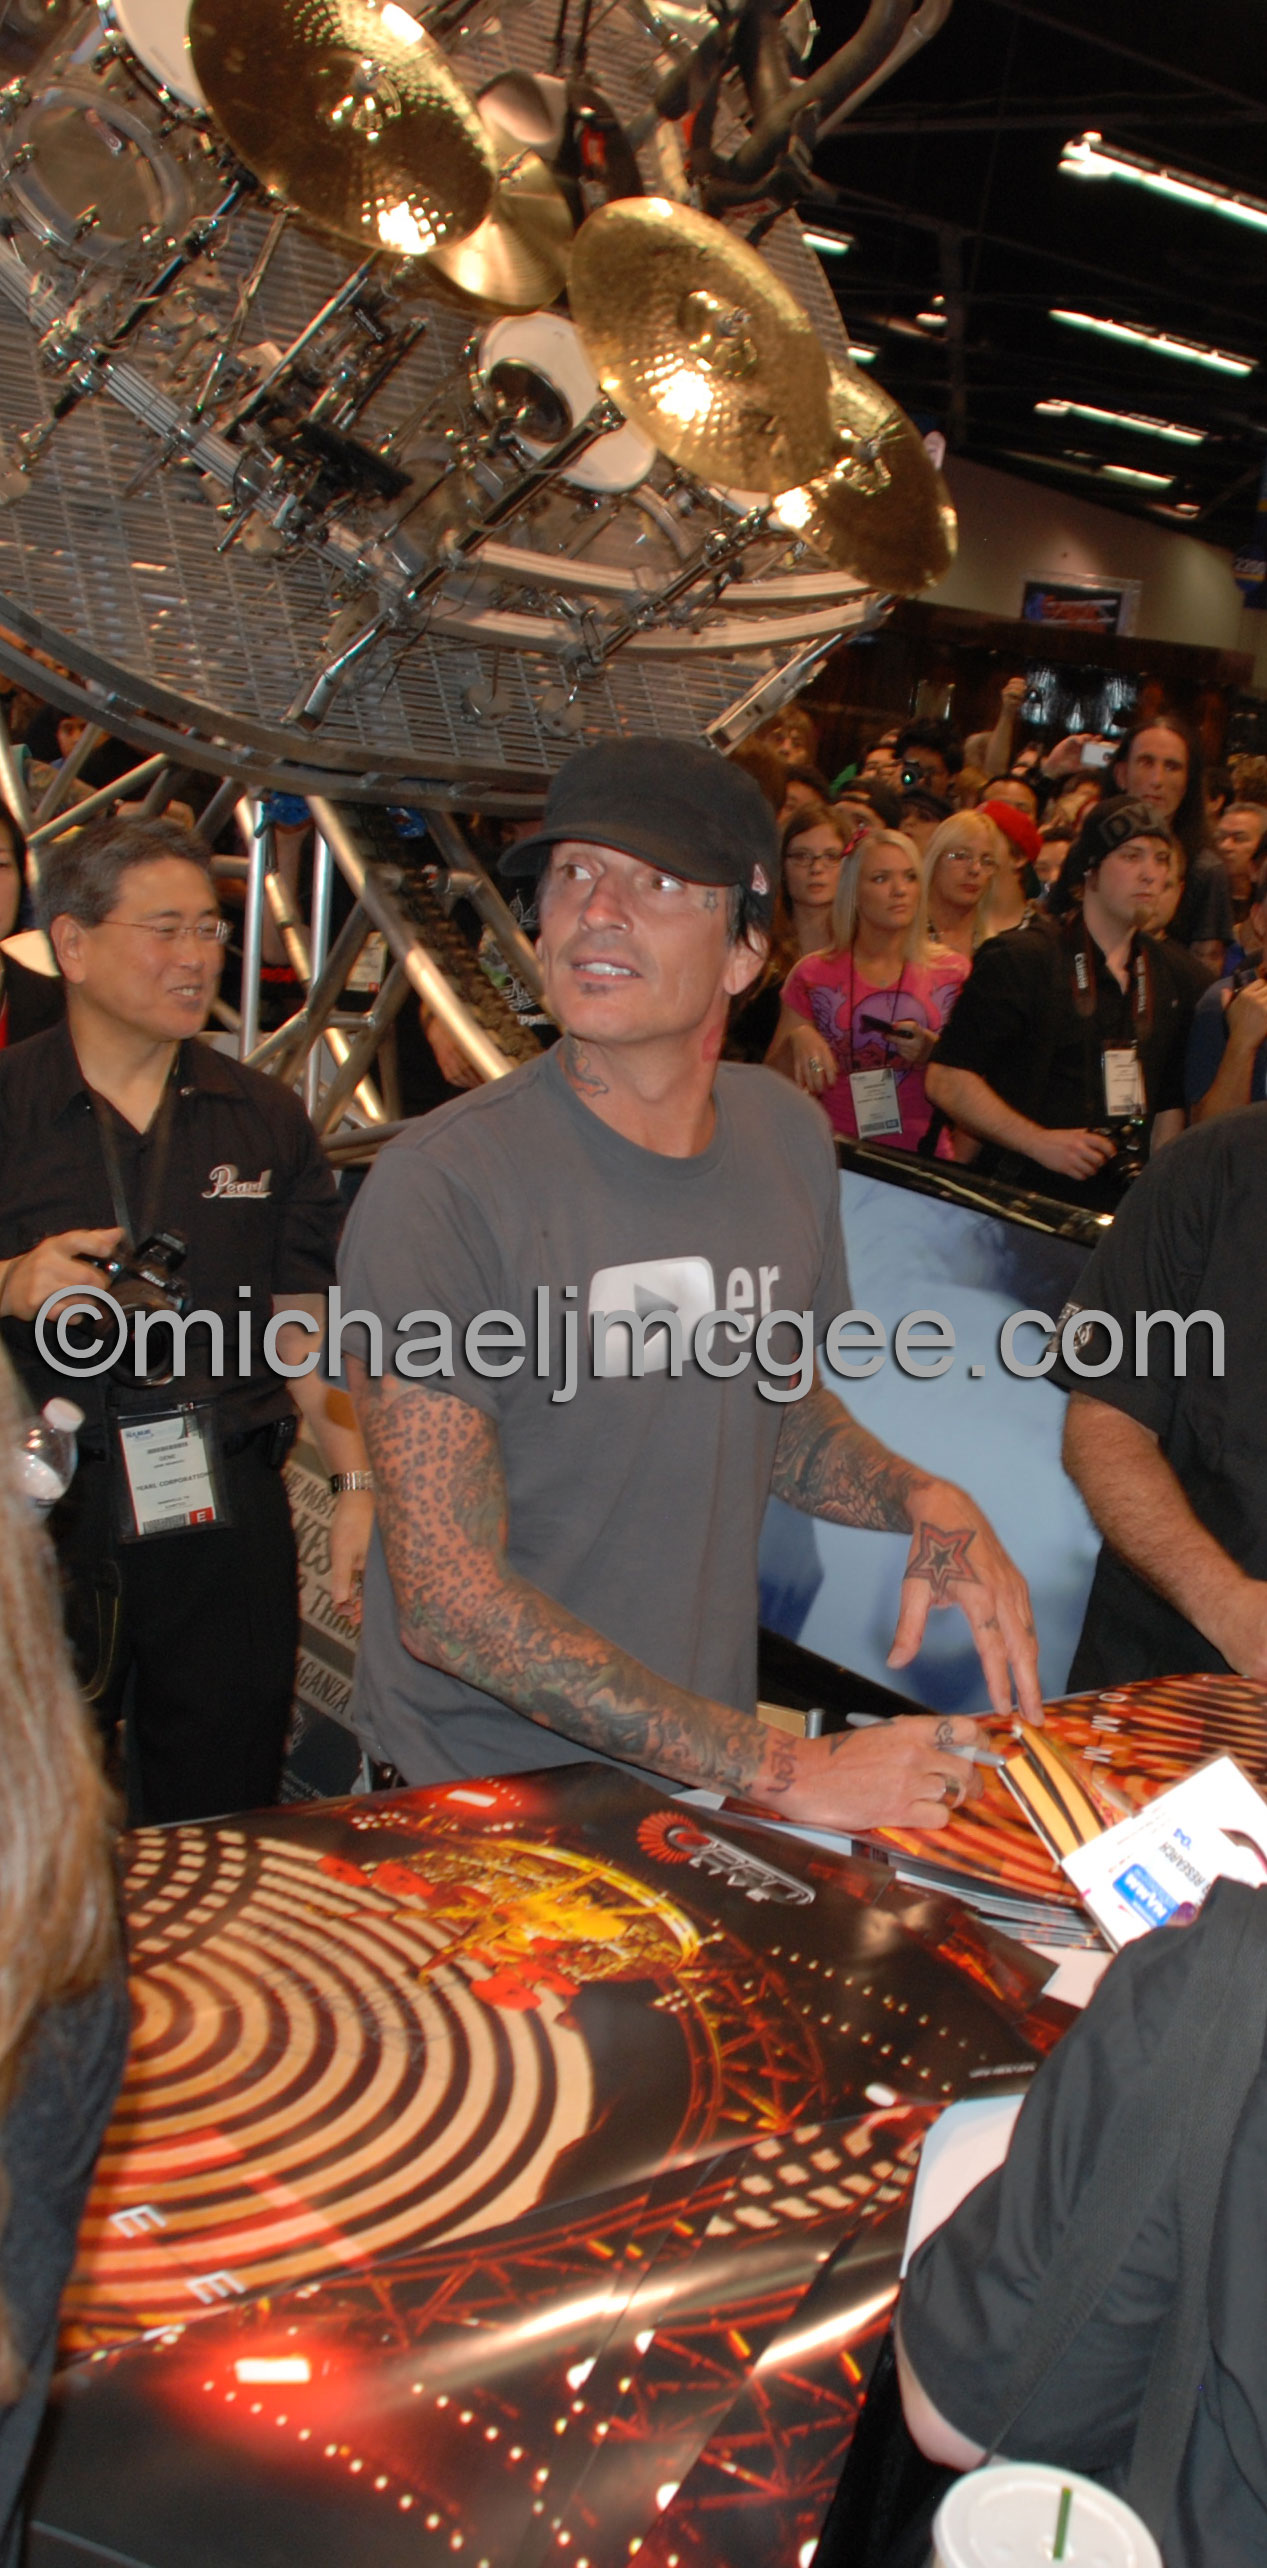 Tommy Lee / michaeljmcgee.com